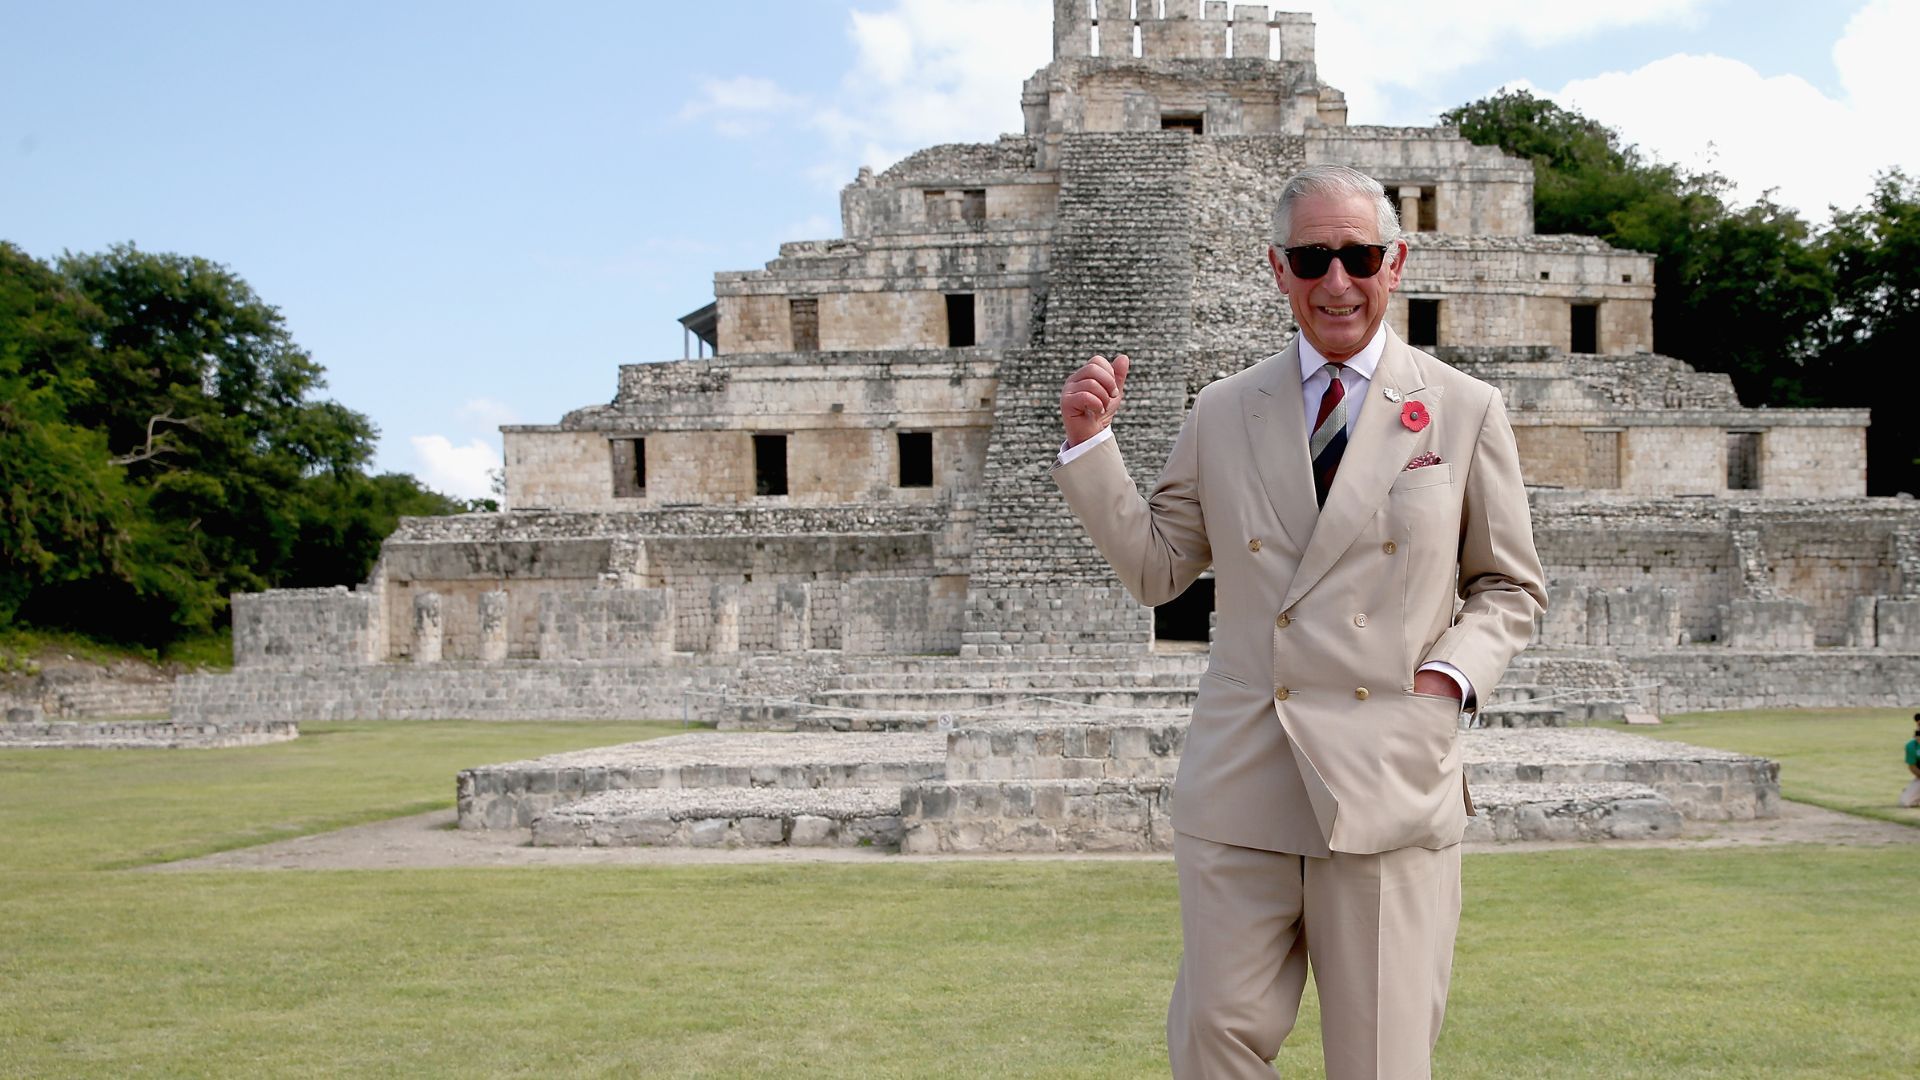 <p>                     A rather casual pose for the royal, with shades on and the ‘here’s looking at you kid’ gesture, the-then Prince Charles certainly looked to be enjoying himself while visiting the Acropolis at the Edzna Archaeological site in Campeche, Mexico. He took the suave photo during his and Duchess Camilla’s tour of Mexico and Columbia in 2014.                   </p>